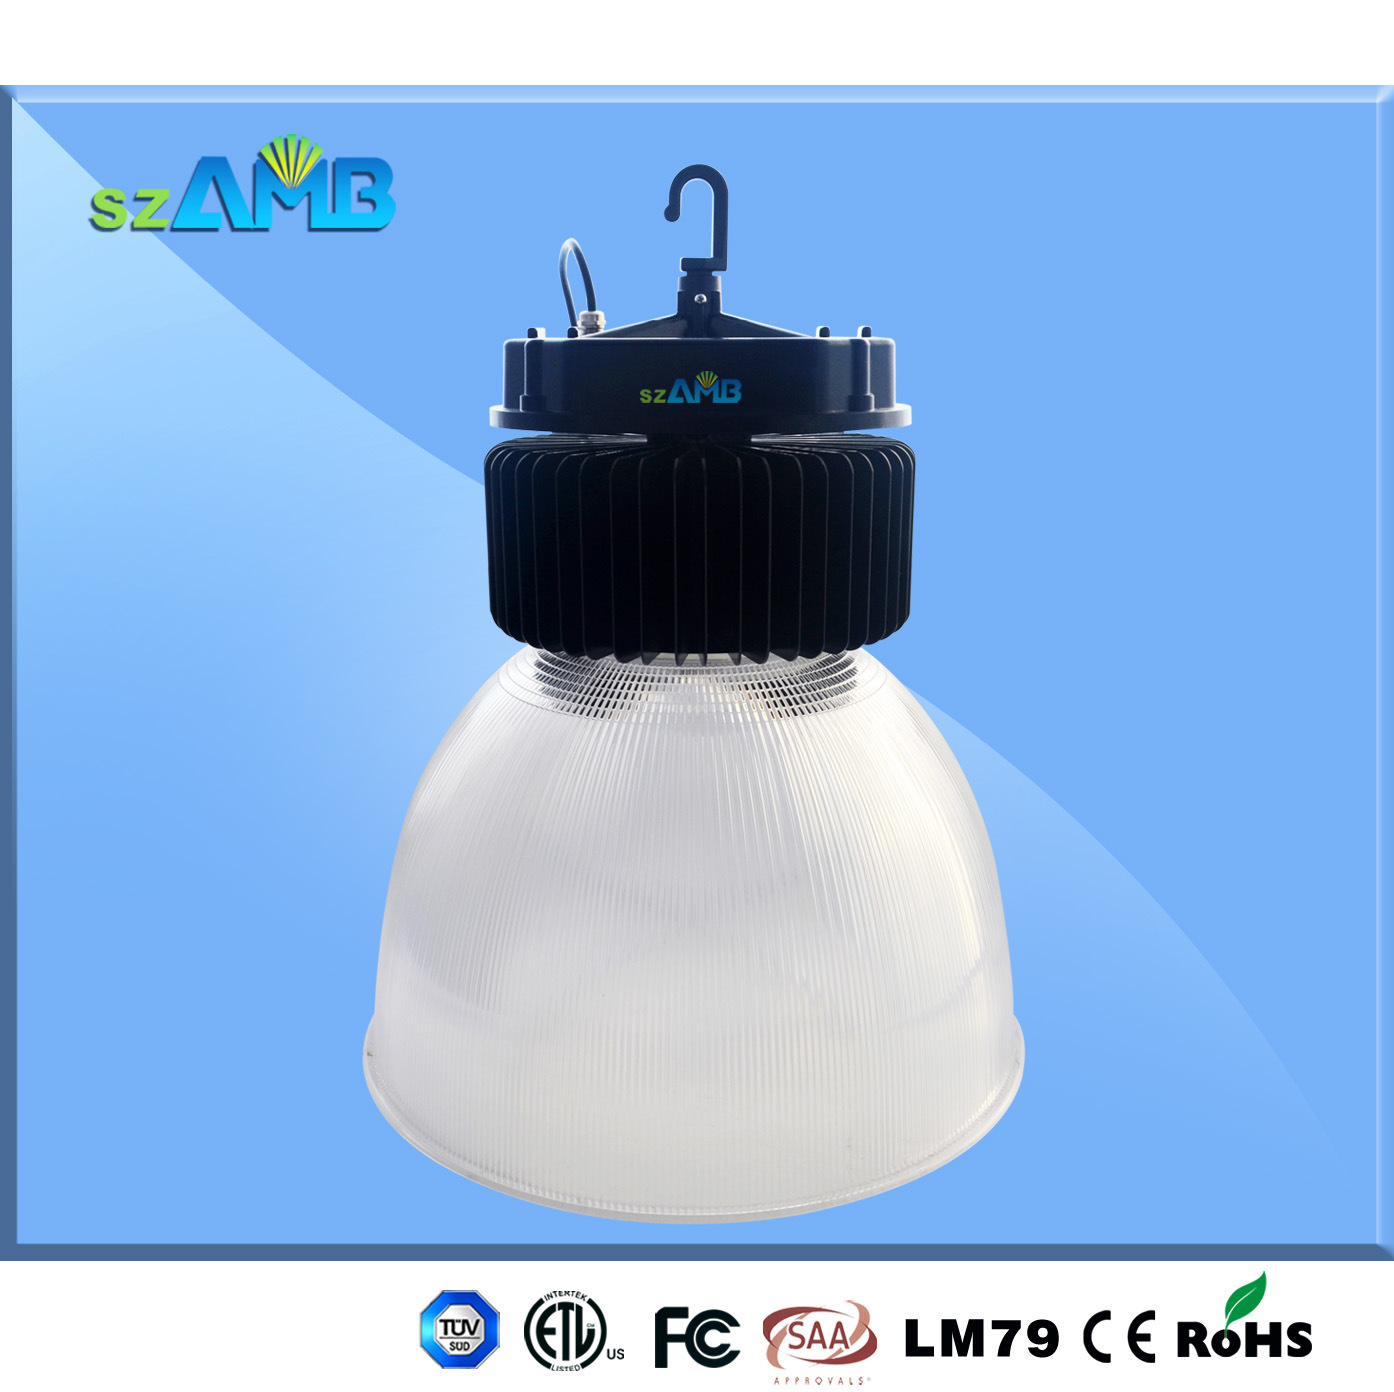 LED High Bay Light 150W with Patent Cooling System